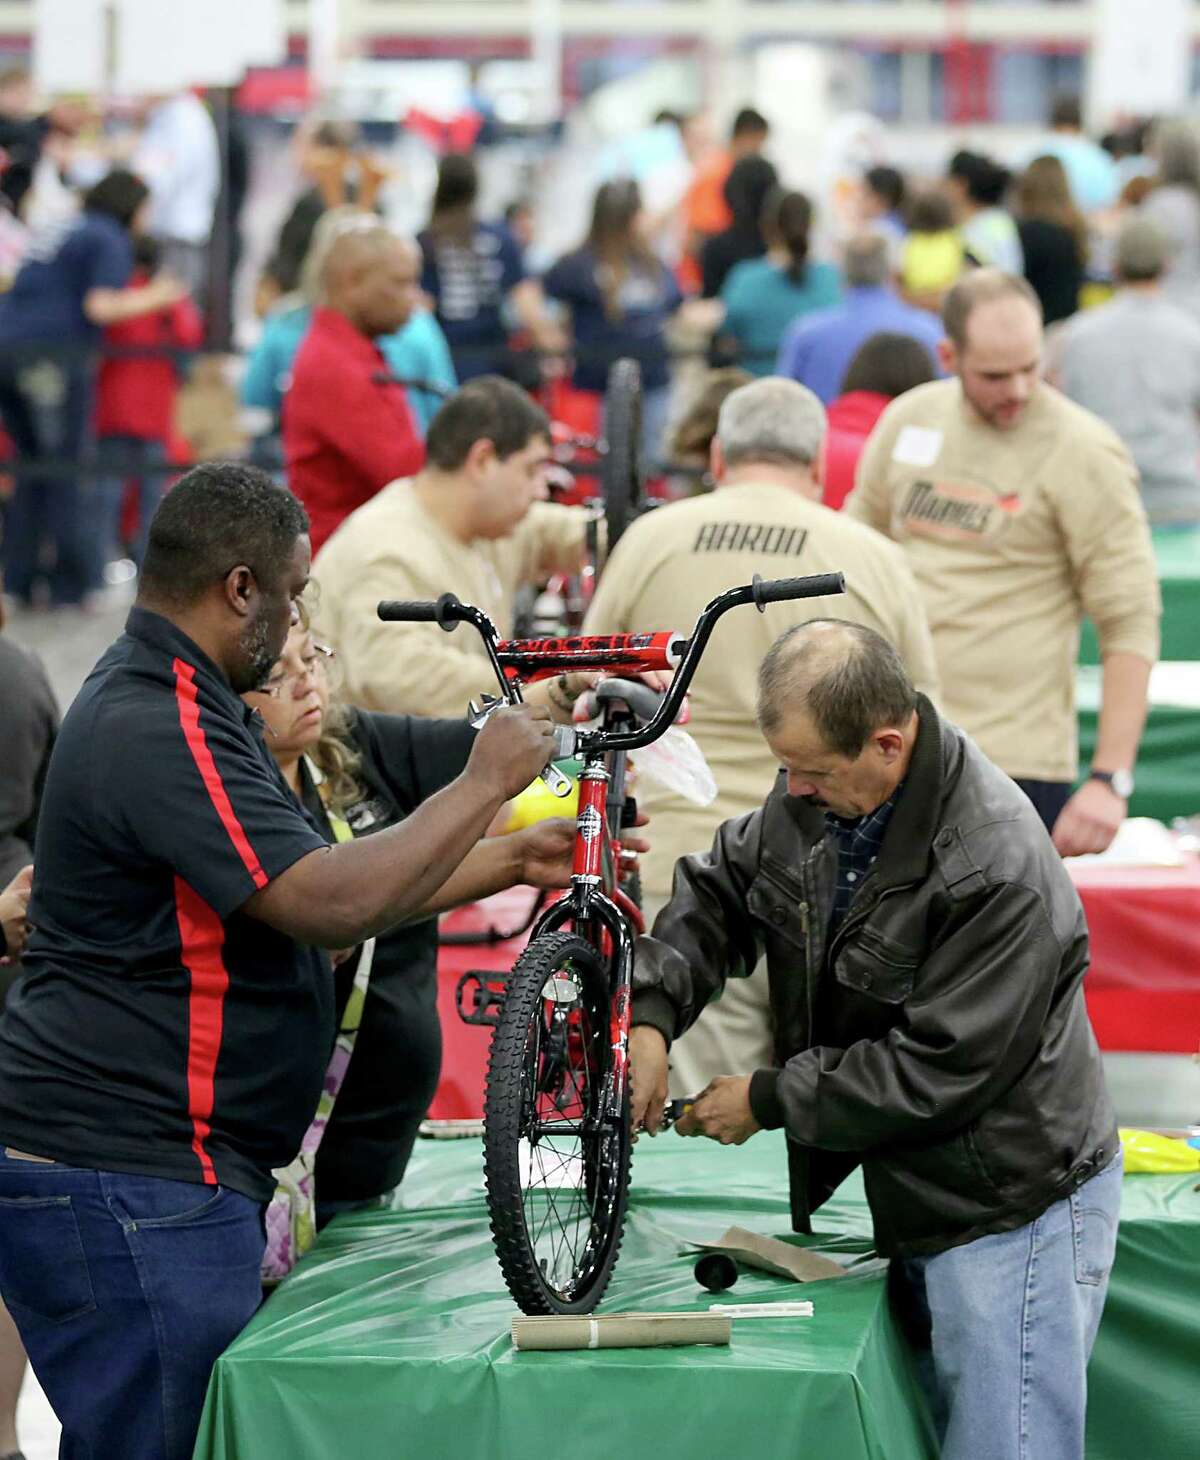 Twenty seven team participate in the Hotel and Lodging Association of Greater Houston 15th Annual Bike Building Competition on Monday December 8, 2014 at the George R. Brown Convention Center in Houston, TX.